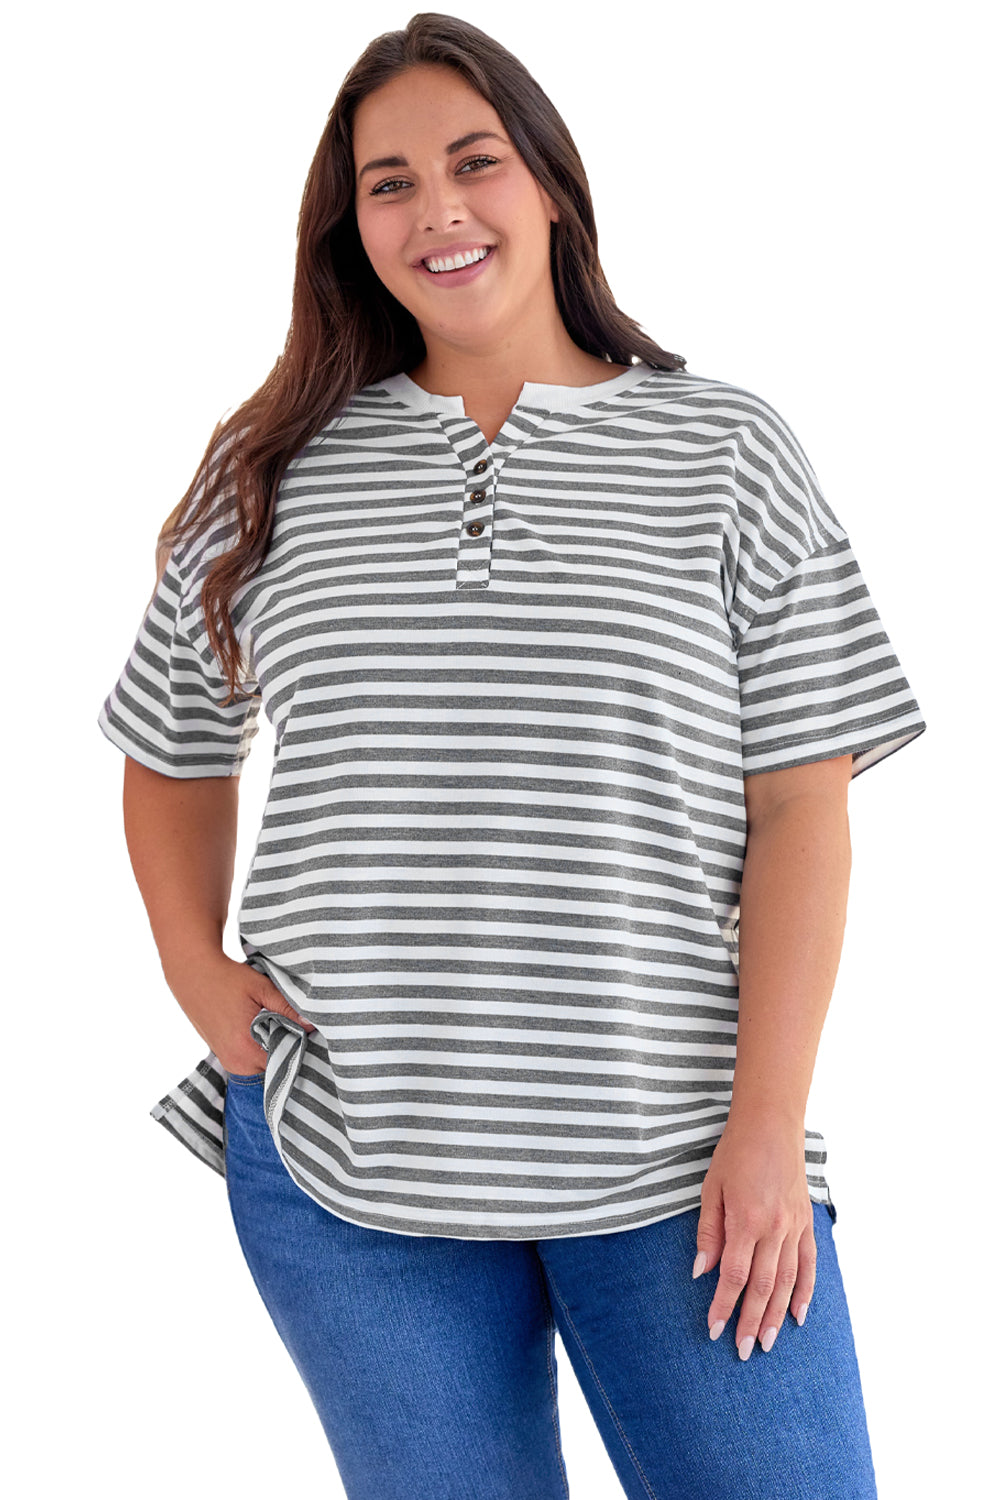 Plus Size Striped Notched Neck Short Sleeve Tee - nailedmoms